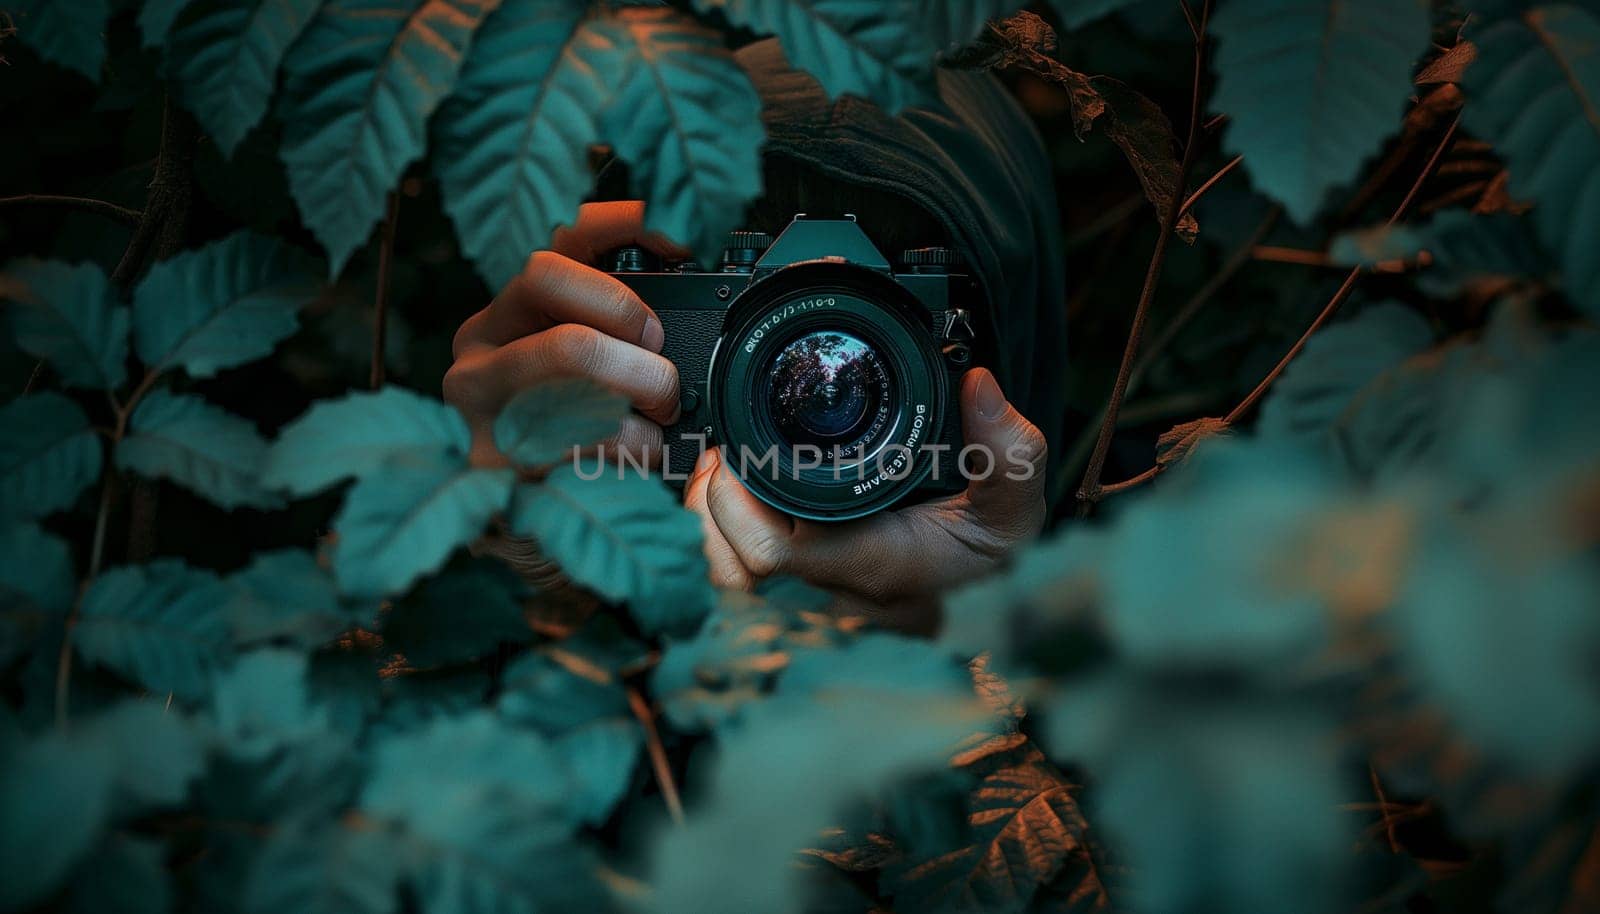 Paparazzi. A secretive photographer takes pictures from behind bushes by NeuroSky